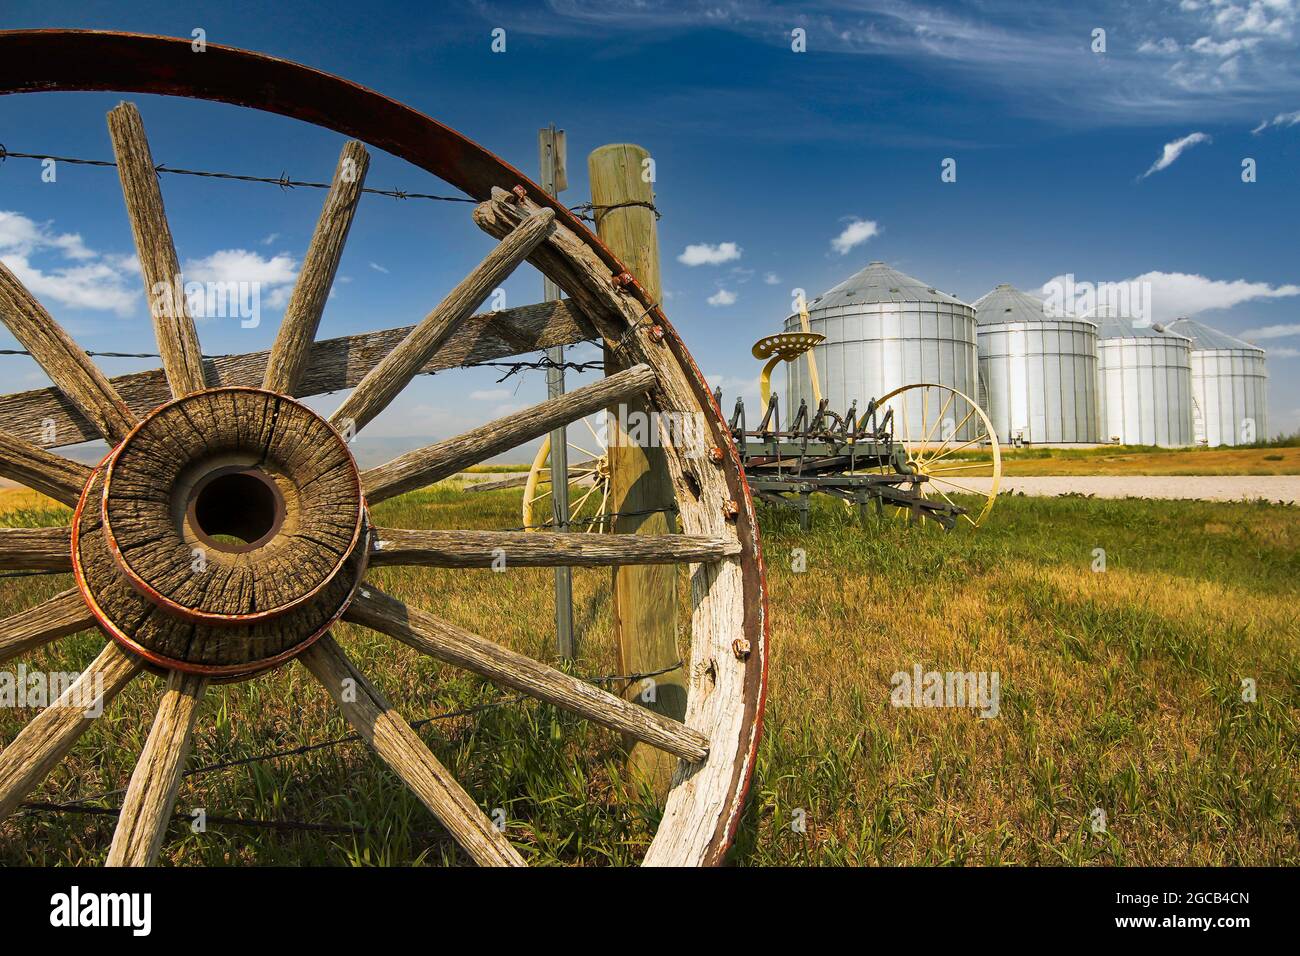 A vintage horse drawn cart wheel and grain silos on the Canadian Prairies during a summer day. Stock Photo